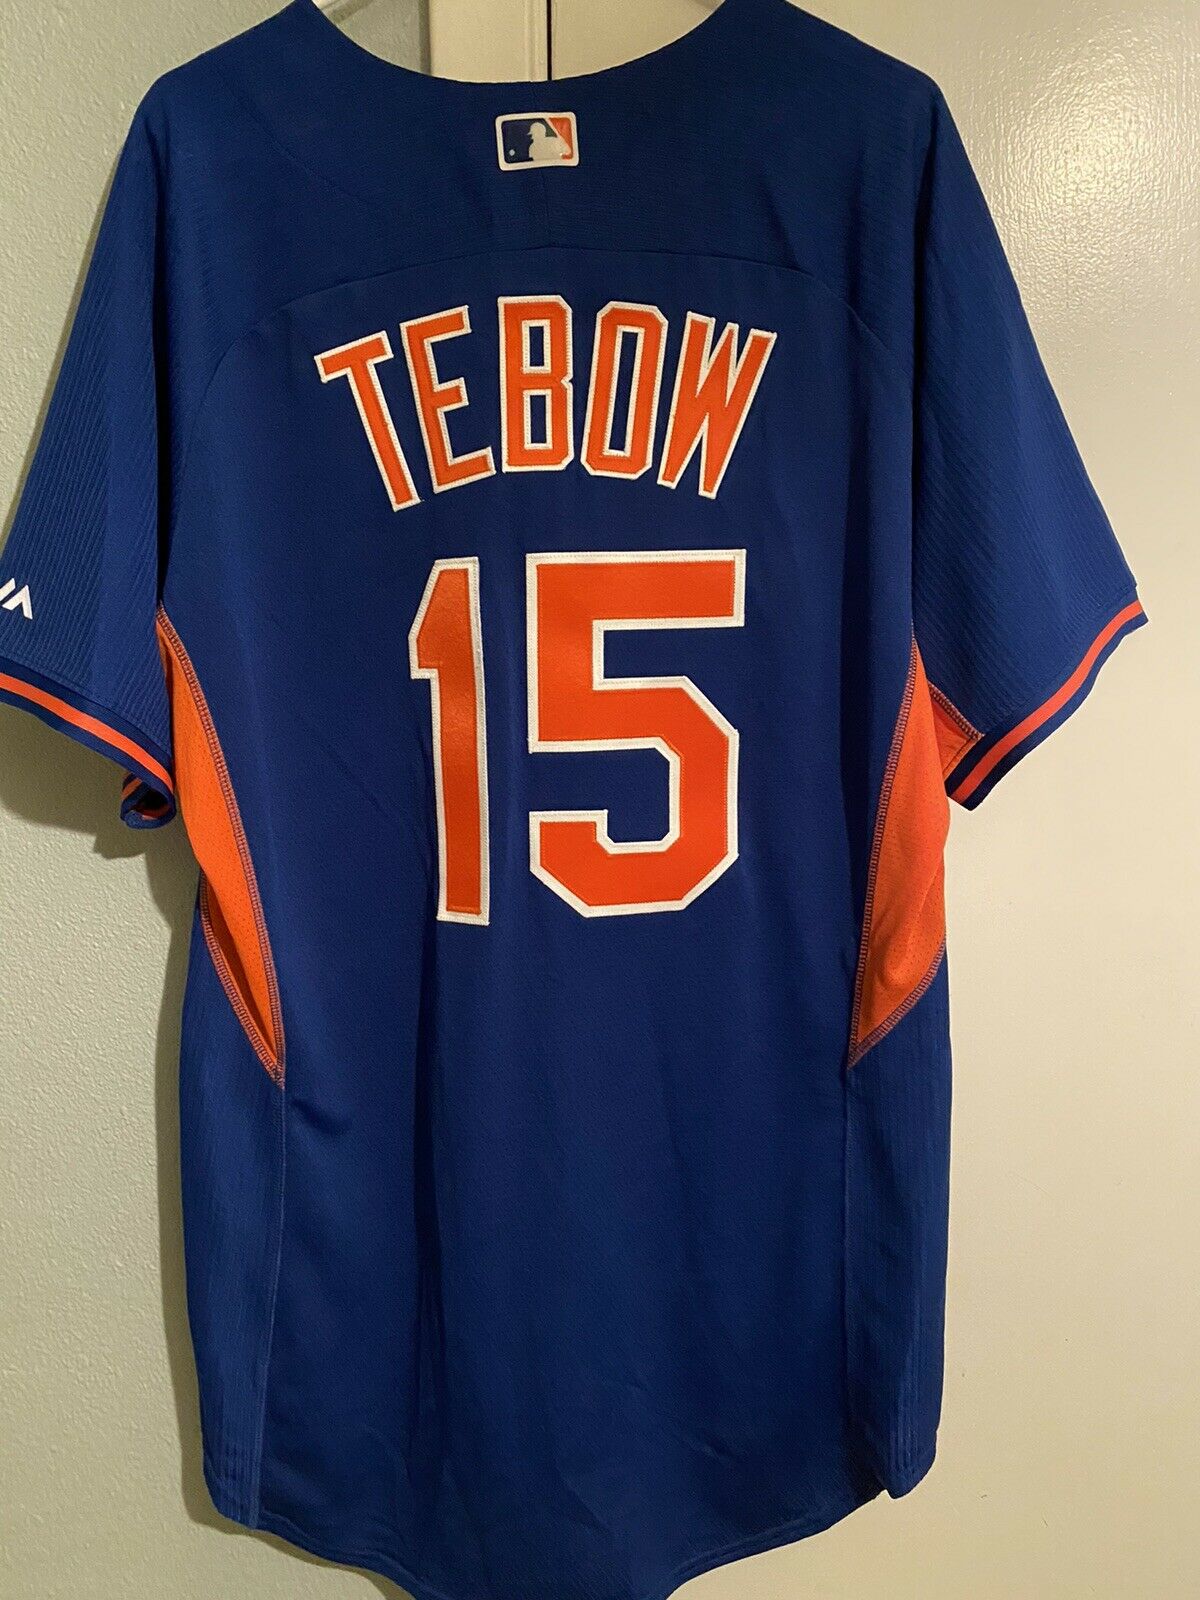 From Football to Baseball, Tim Tebow's Jerseys are Perfect Keepsakes ...